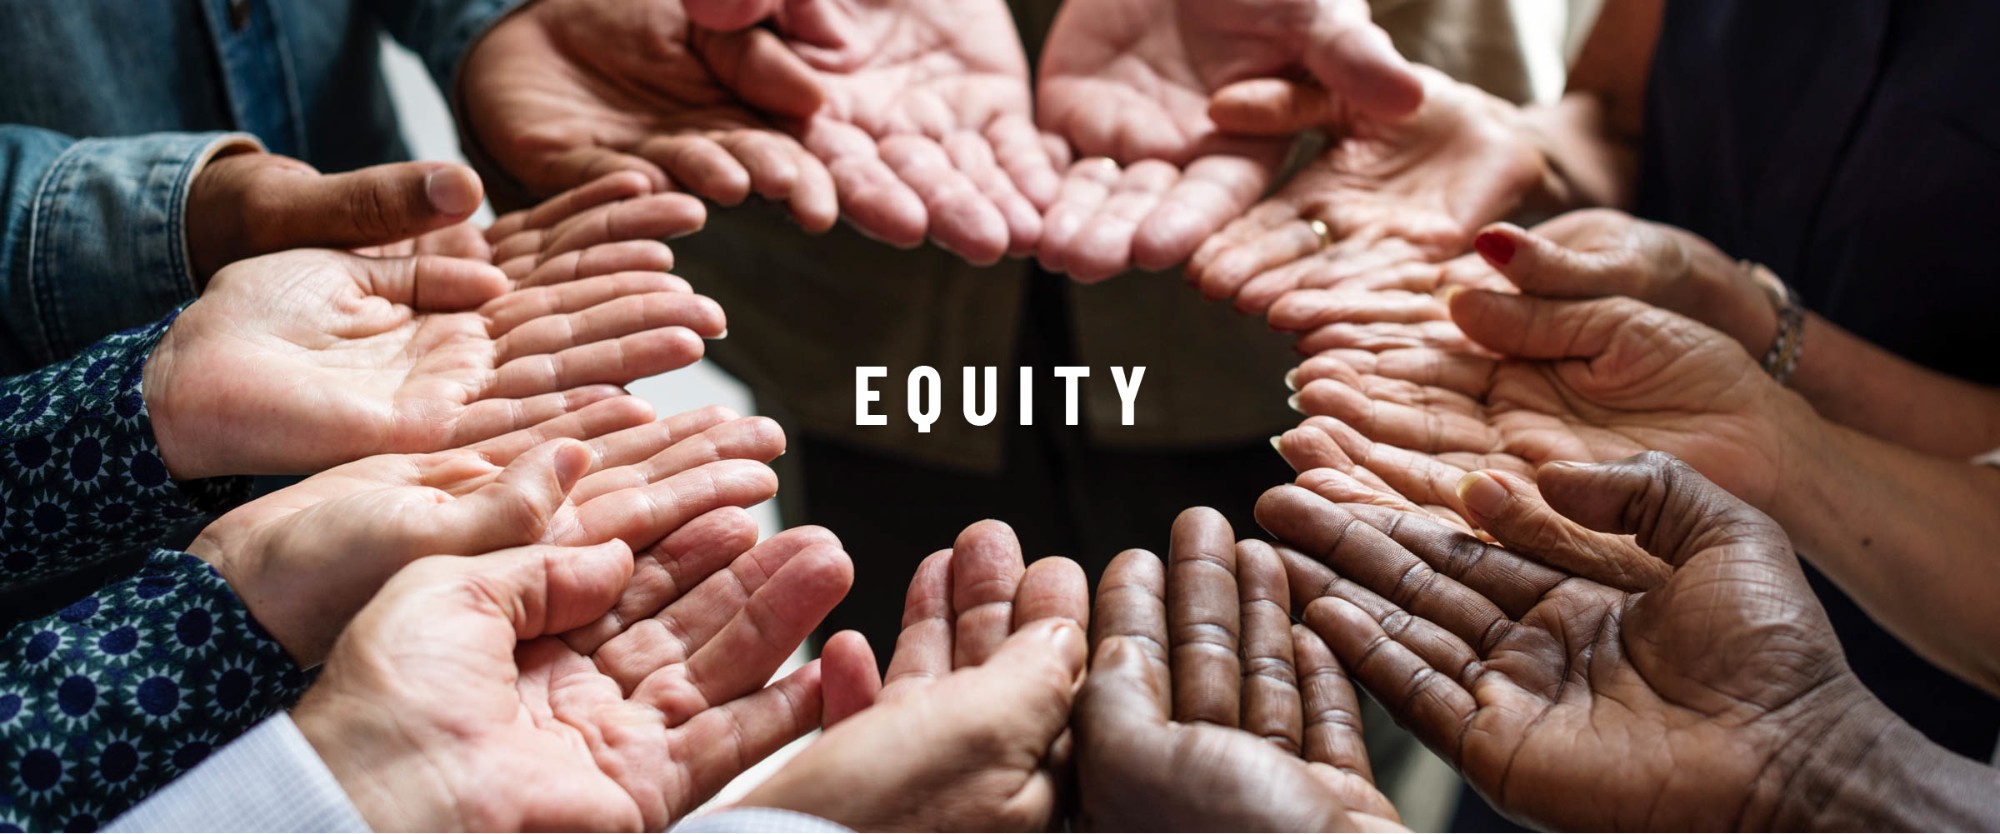 Text: Equity